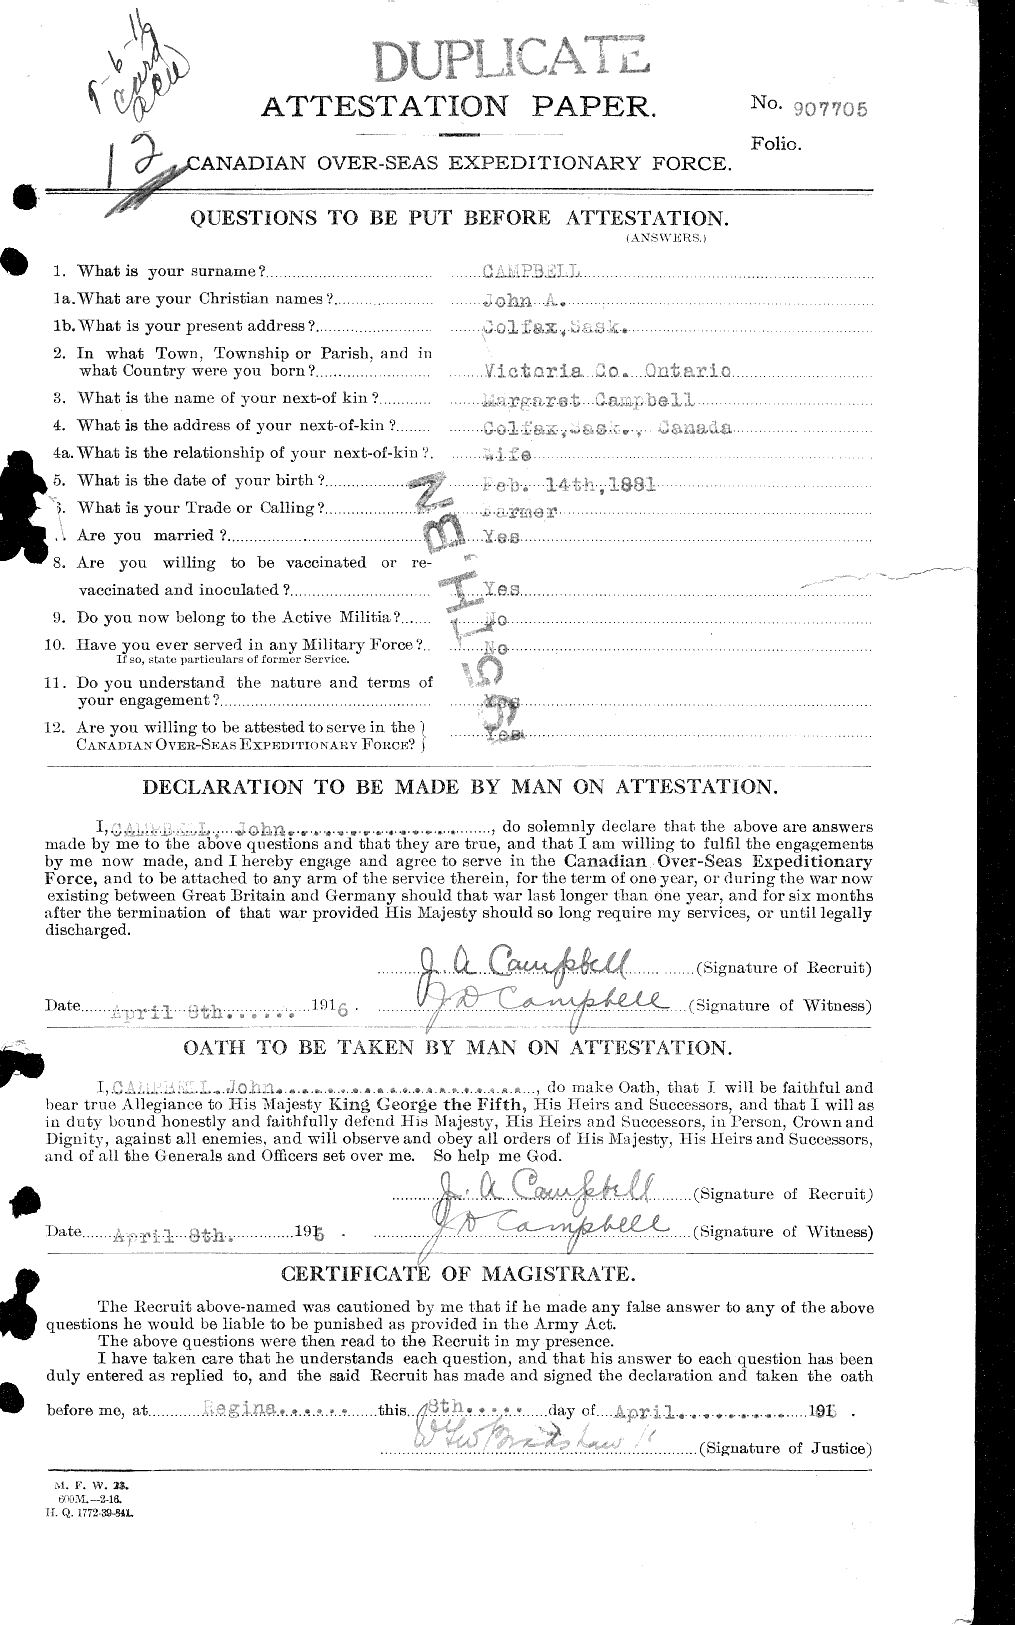 Personnel Records of the First World War - CEF 006849a